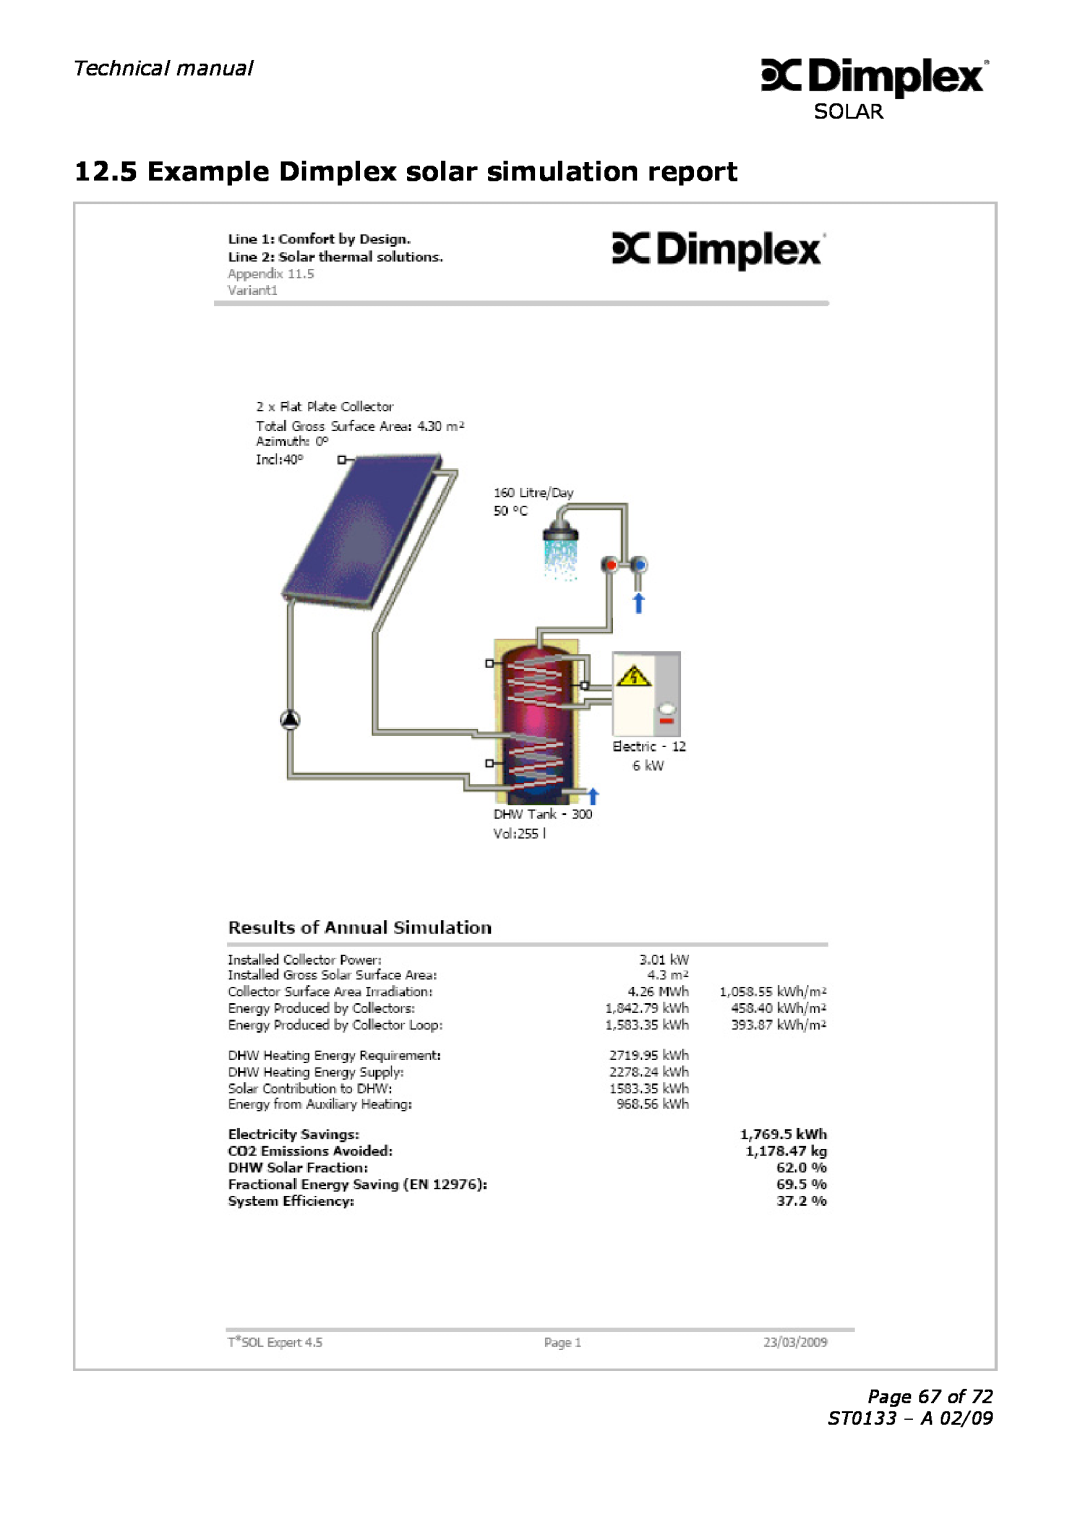 Dimplex technical manual Example Dimplex solar simulation report, Page 67 of ST0133 - A 02/09 